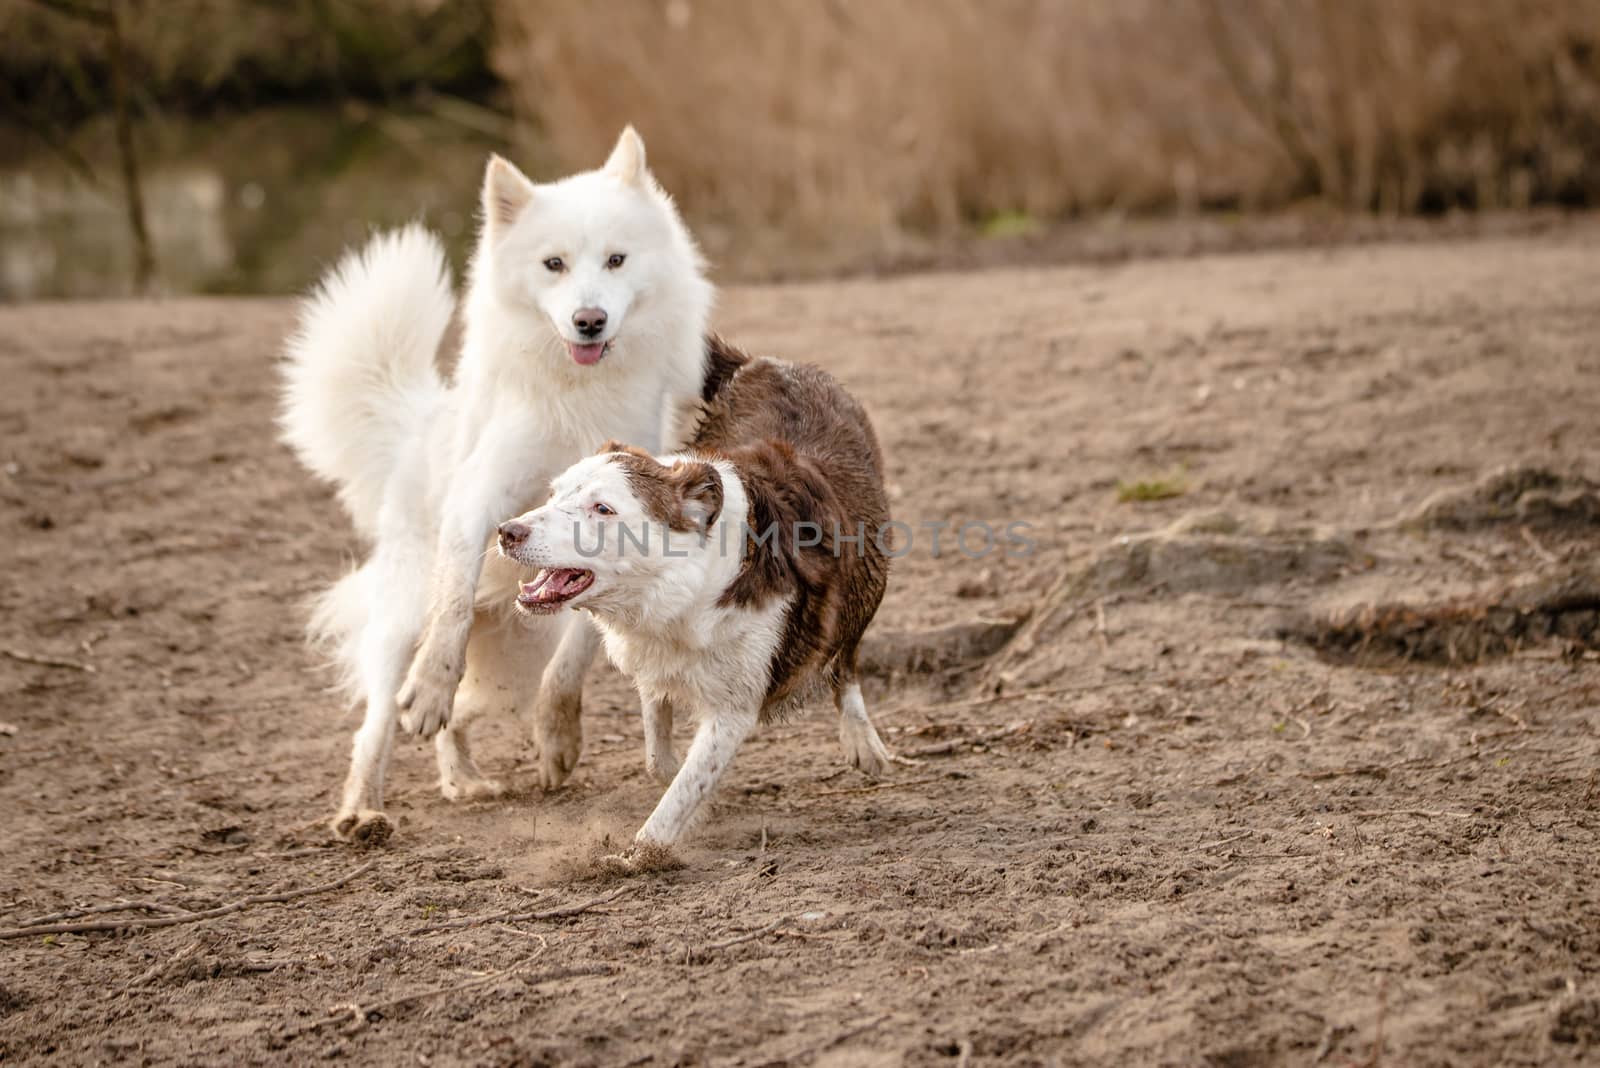 Cute, fluffy white Samoyed dog and her Border Collie friend